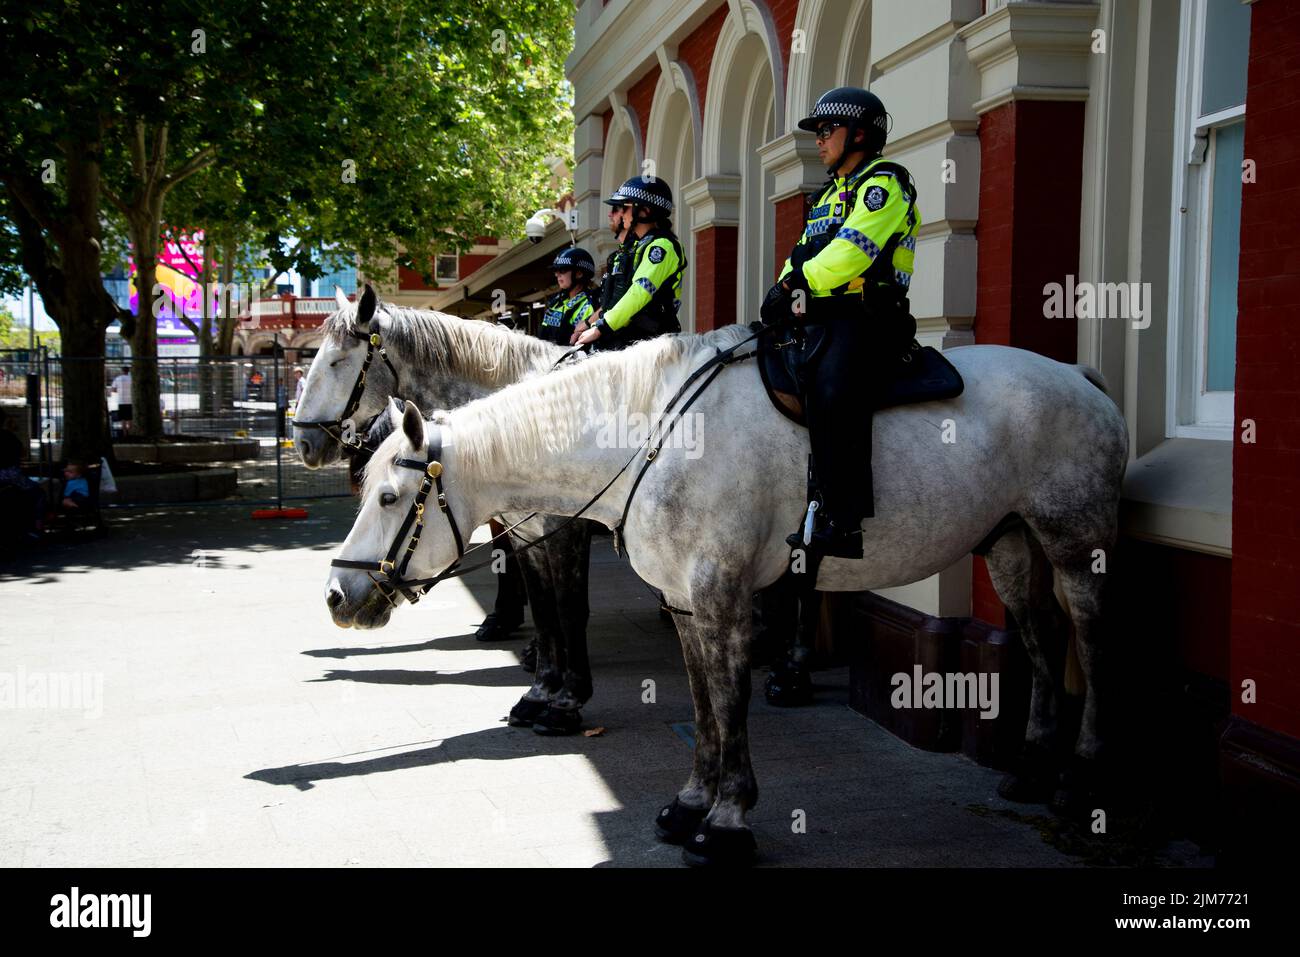 Perth, Australia - November 20, 2021: Police patrolling during the freedom rally protest against vaccine mandates Stock Photo